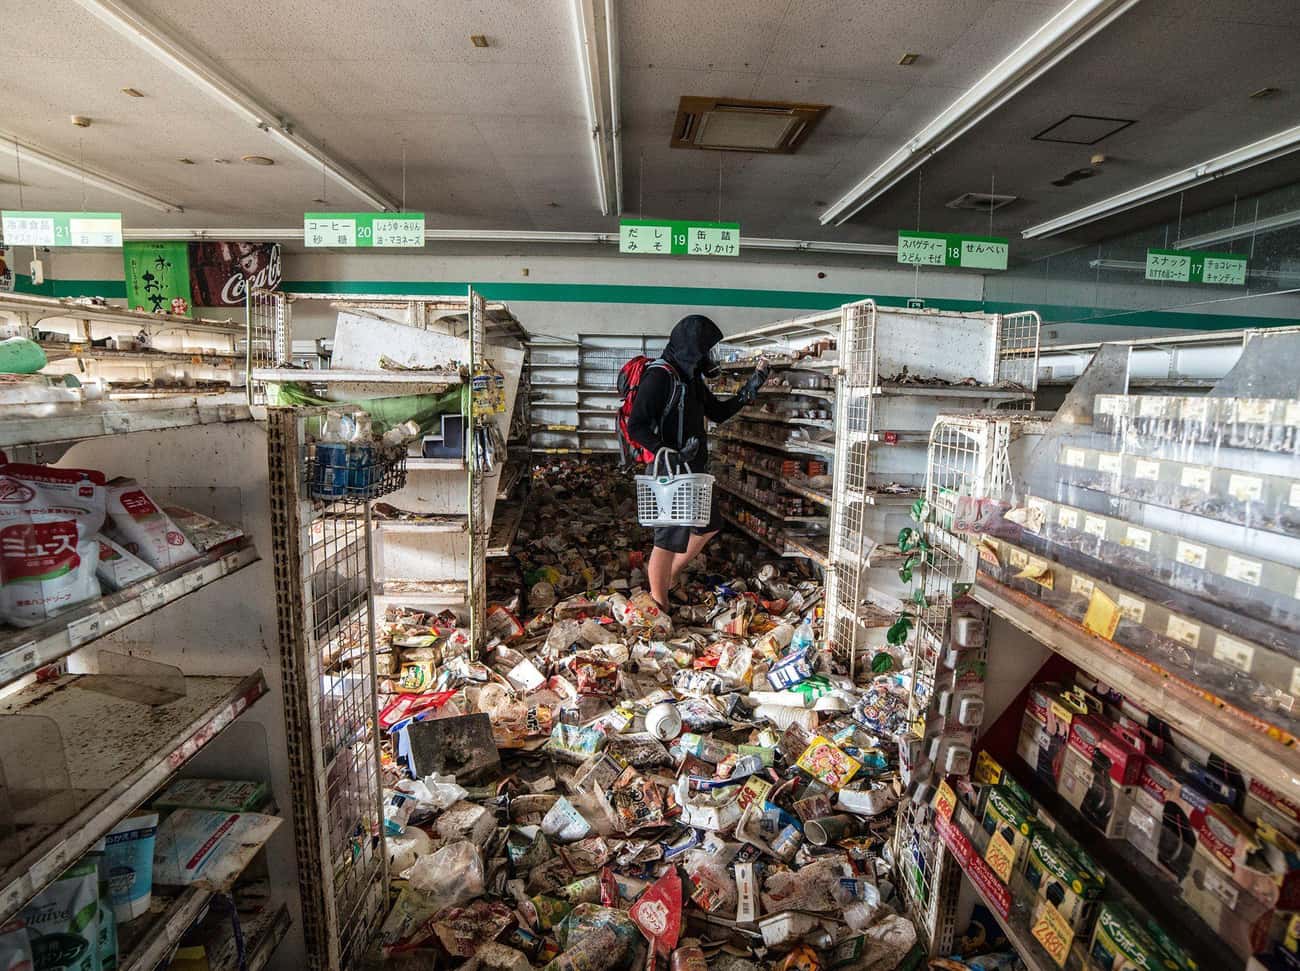 Goods Spill Out Of Shelves In An Abandoned Supermarket Near The Blast Zone